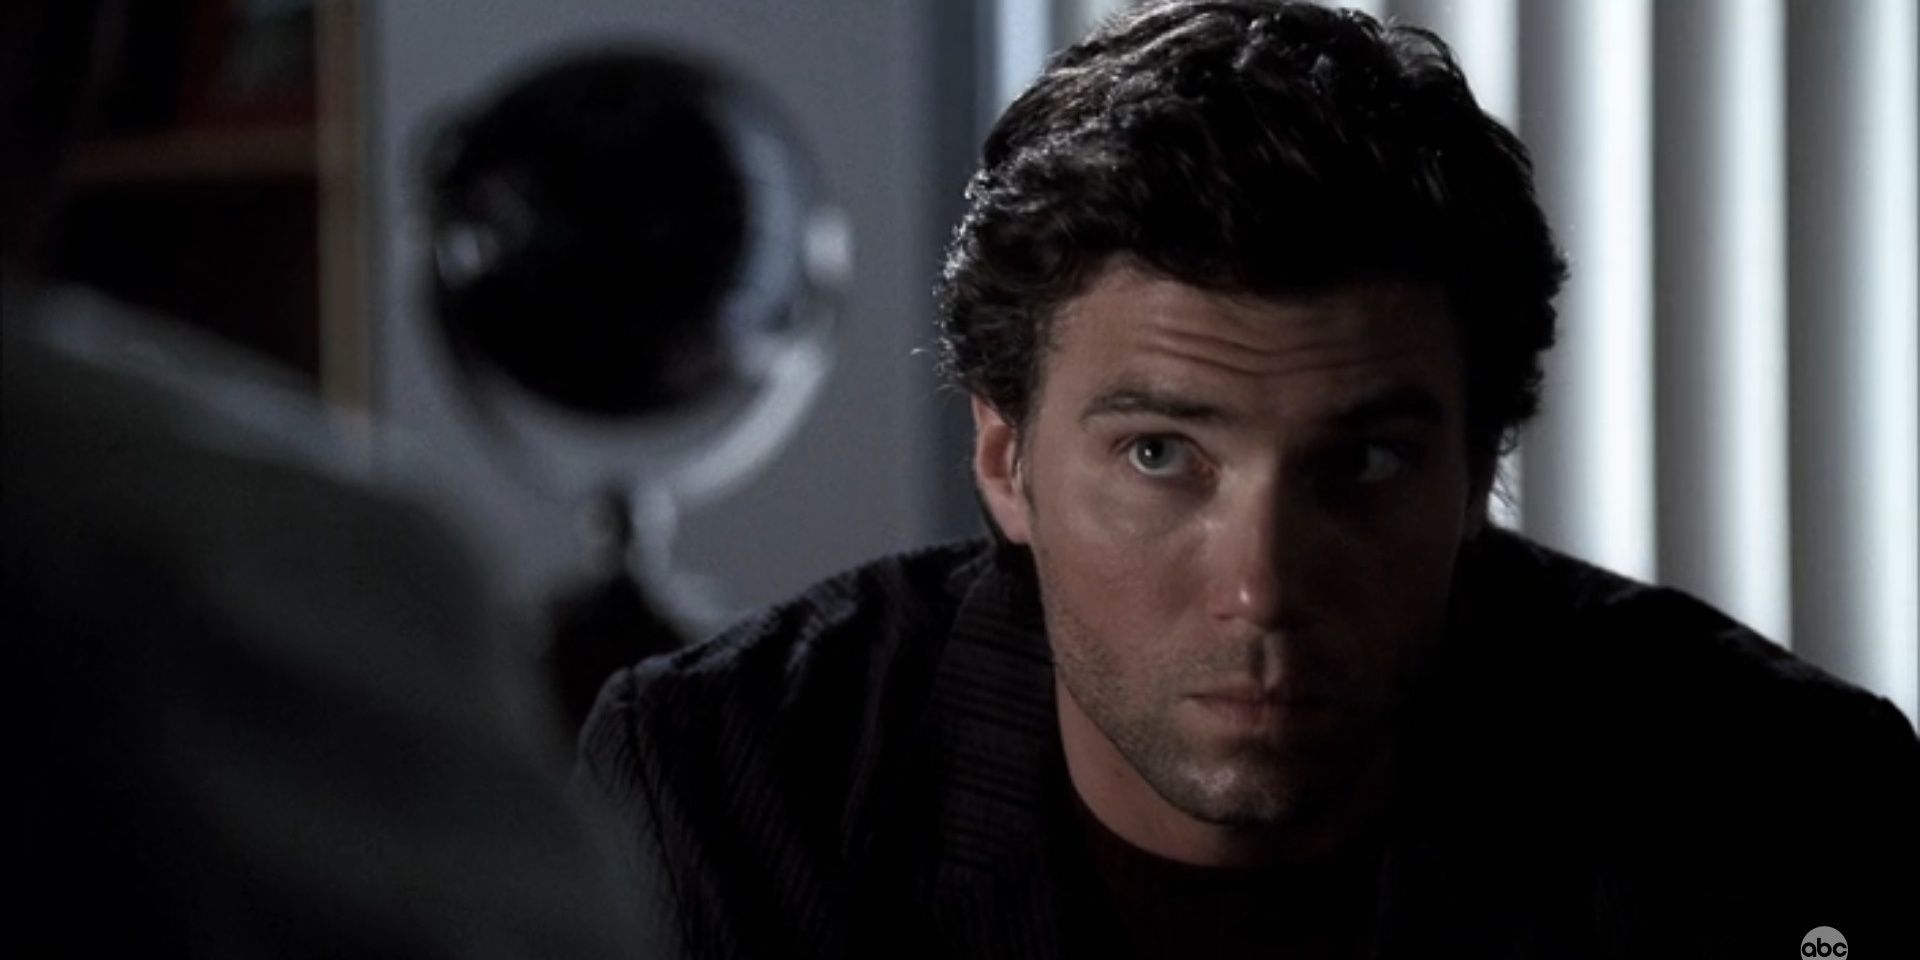 Anson Mount plays Kevin in the pilot of Lost second season